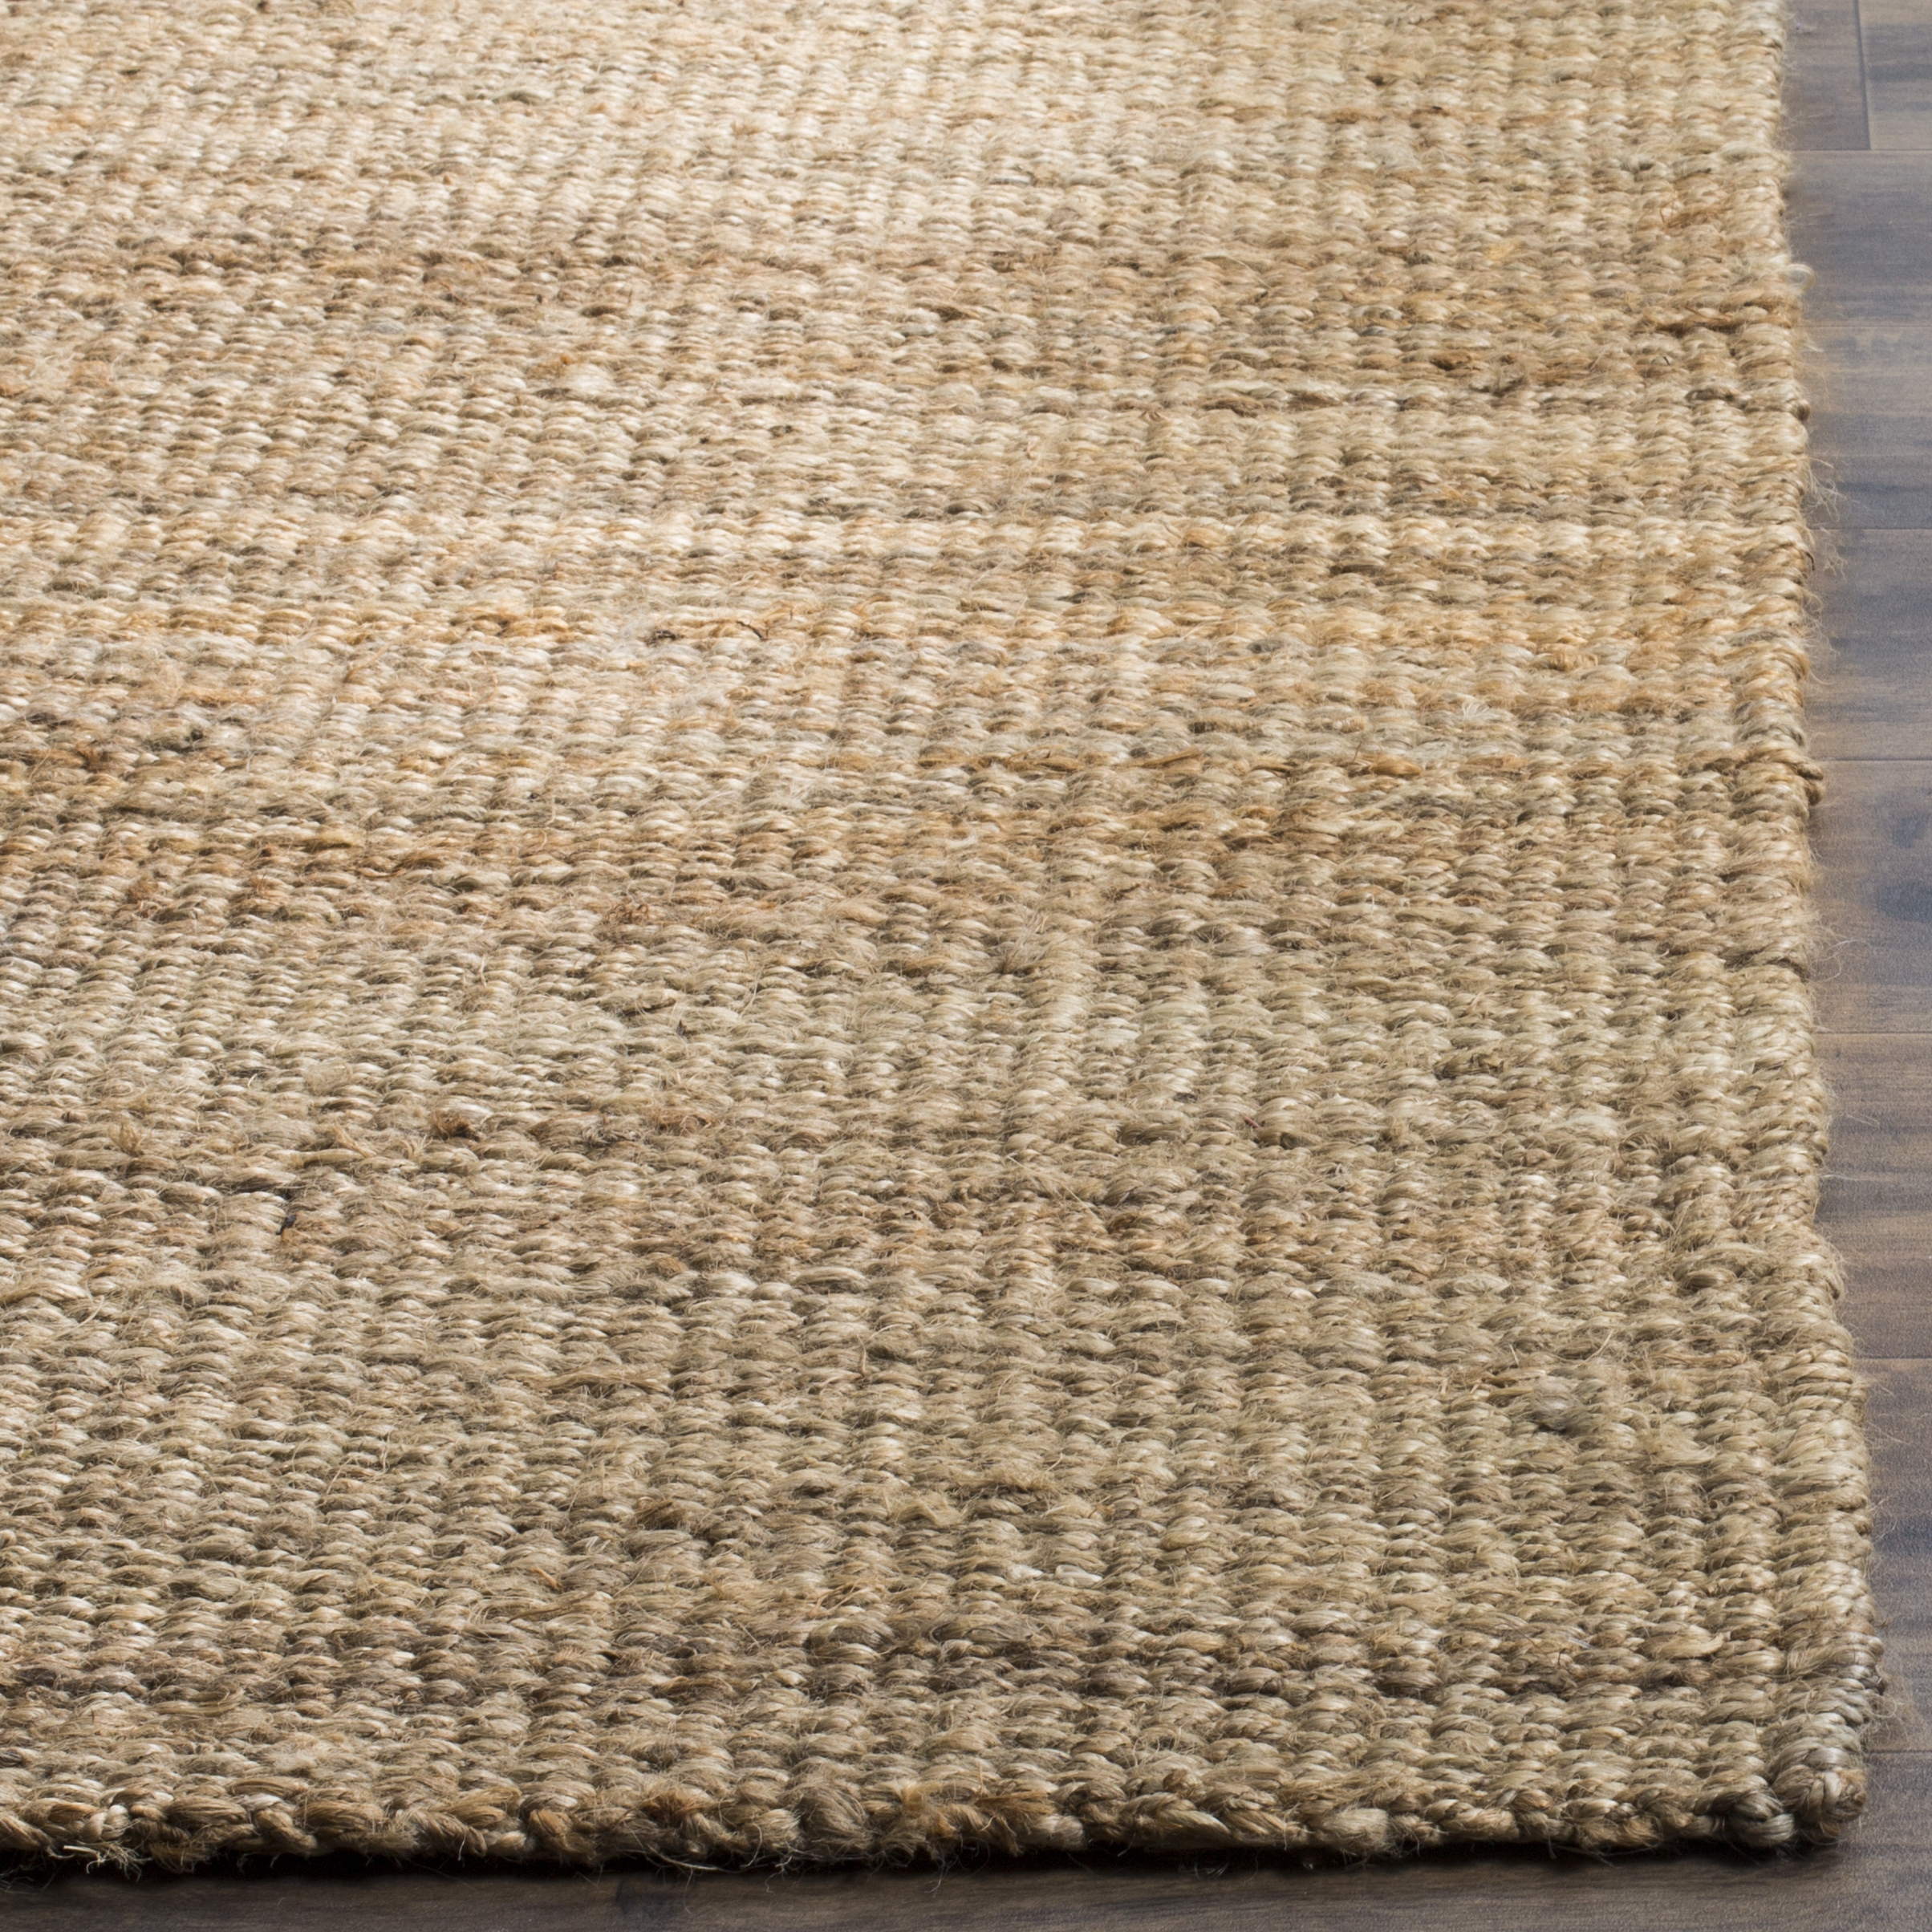 Arlo Home Hand Woven Area Rug, NF732A, Natural,  8' X 10' - Image 1